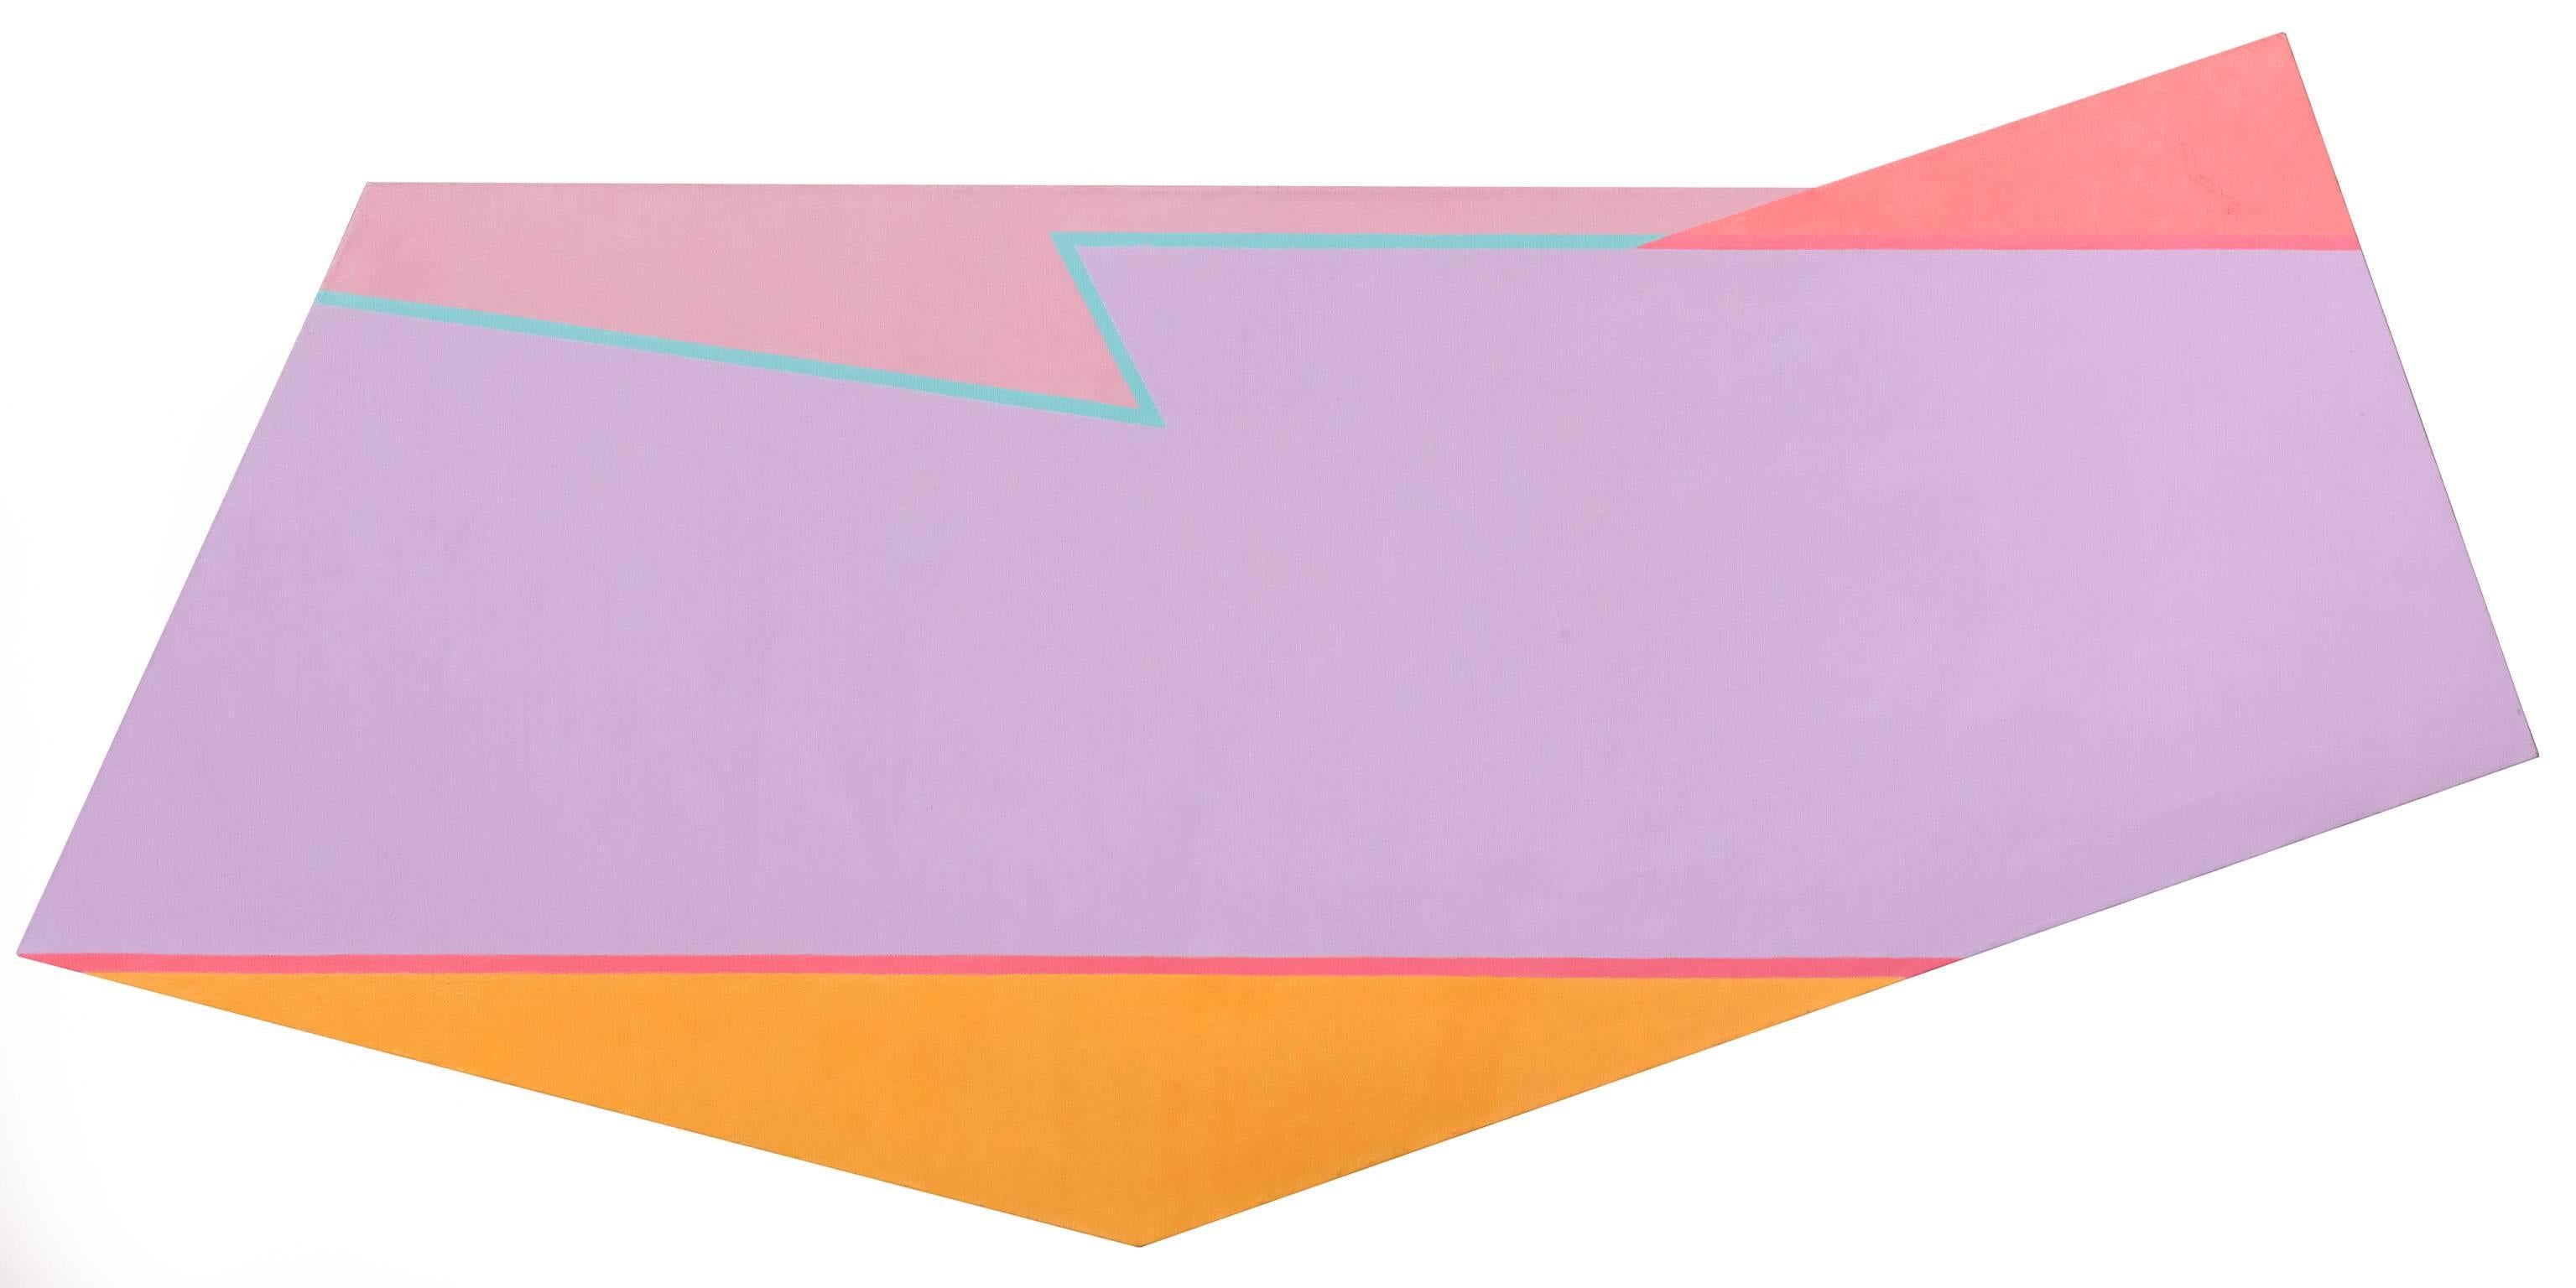 Untitled - Lilac, Red, Pink and Orange Polygonal Geometric Painting